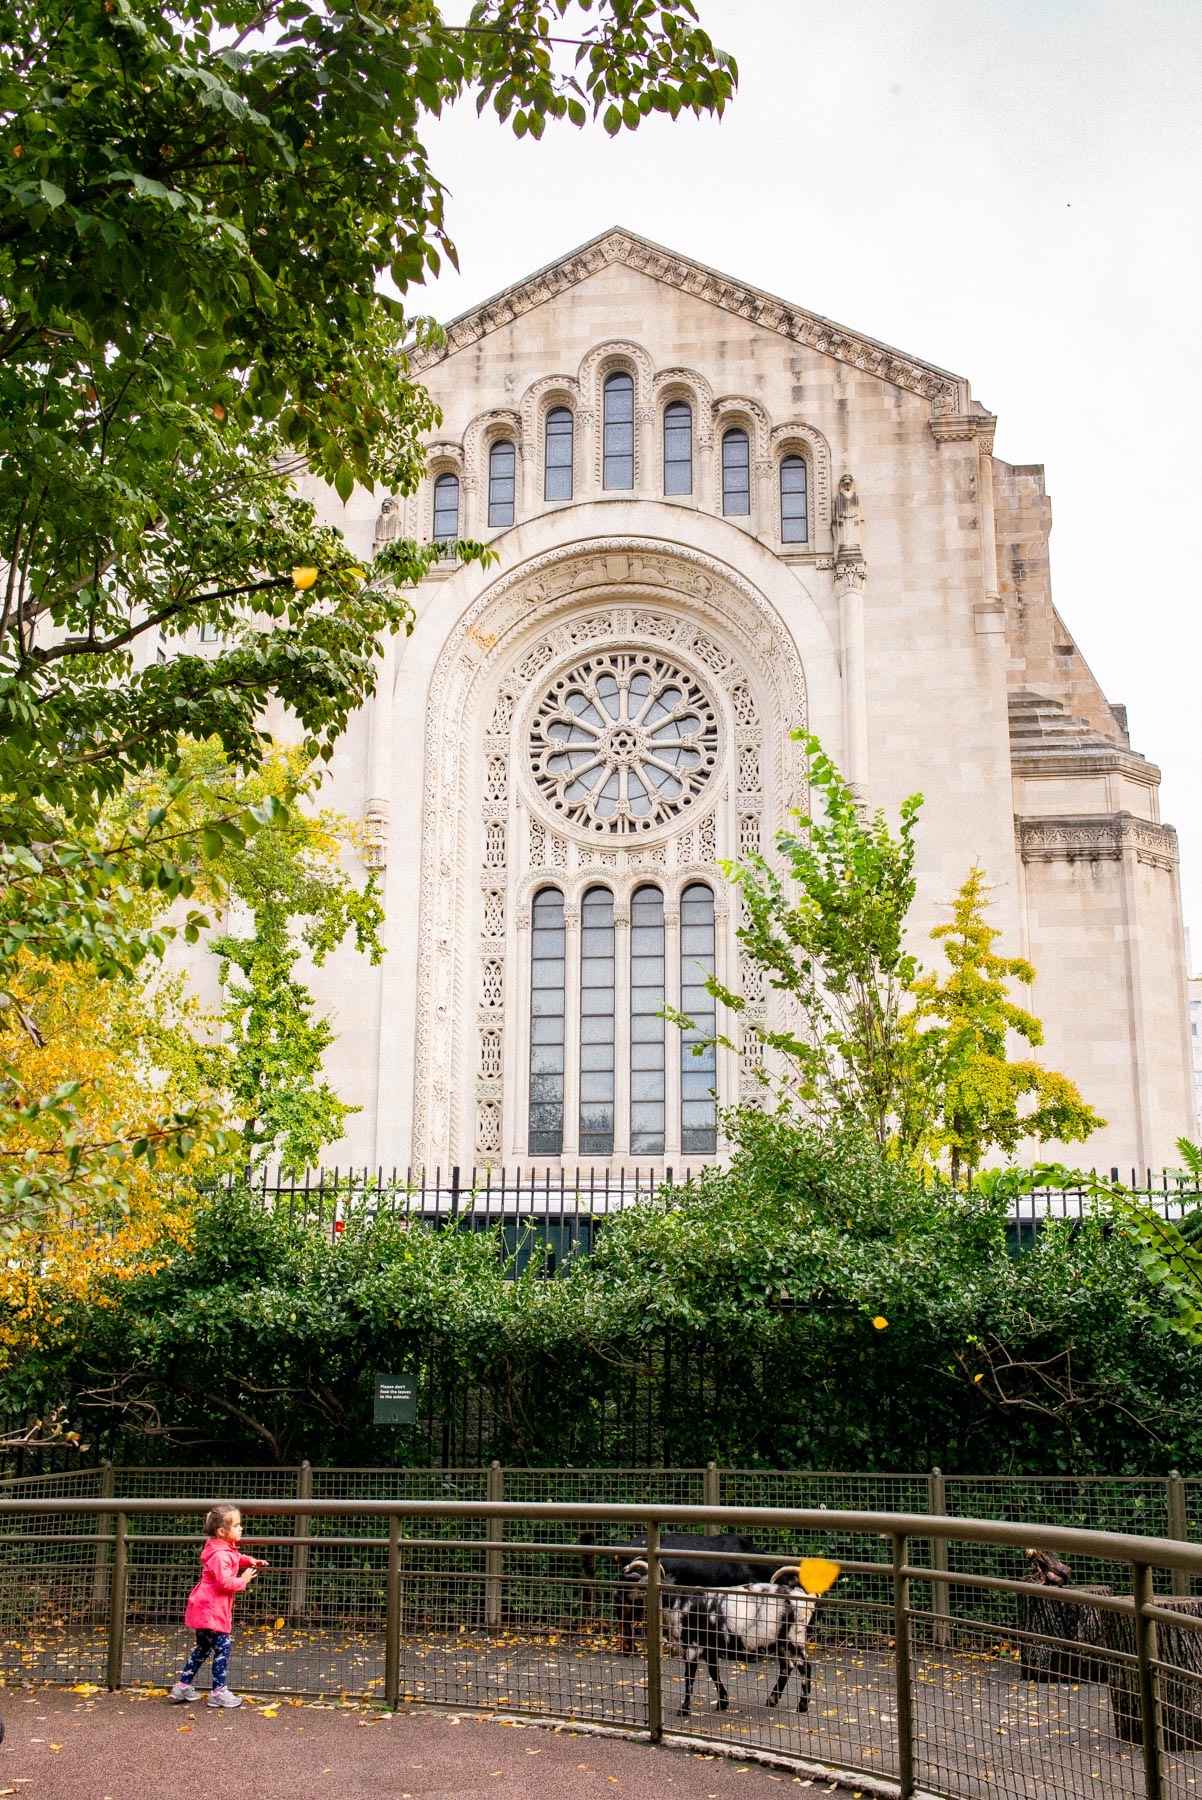 Temple Emanu-El, an important Jewish Institution in NYC located in the Upper East Side,